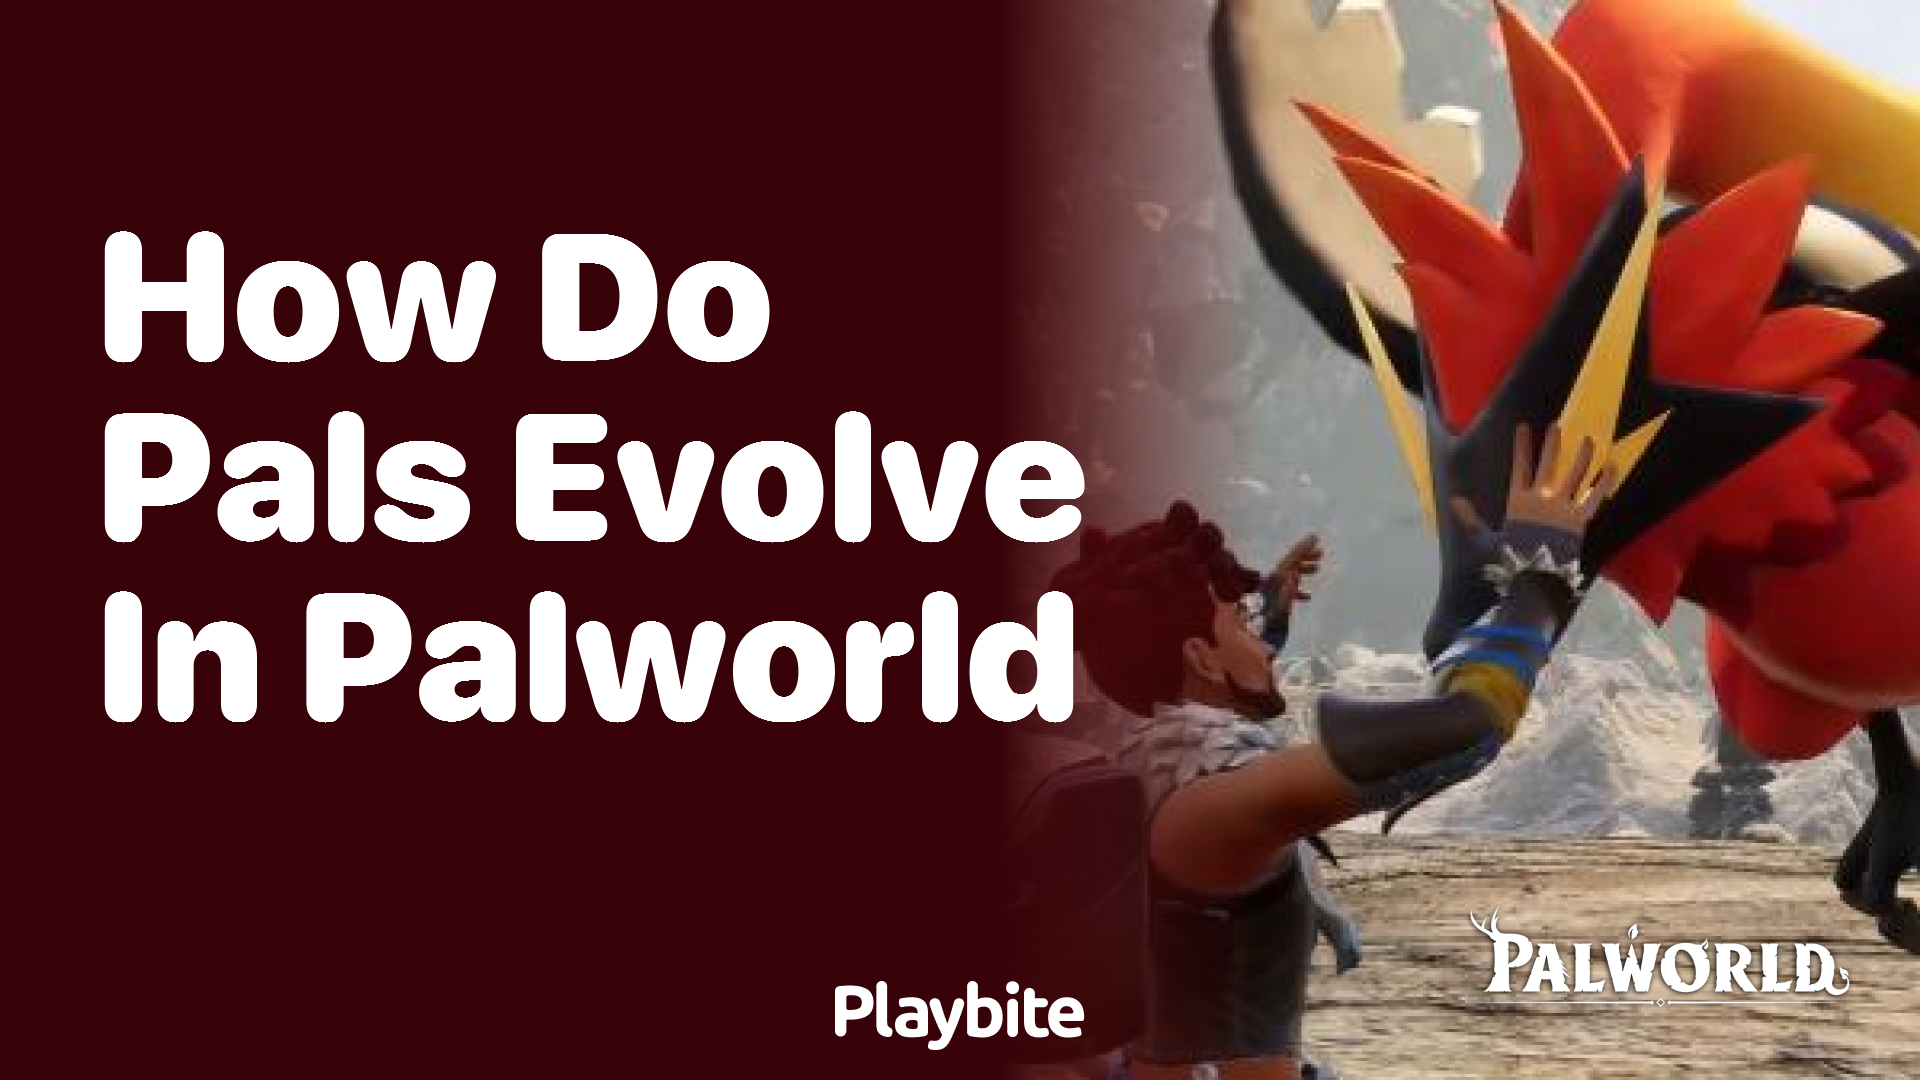 How do Pals evolve in PalWorld?